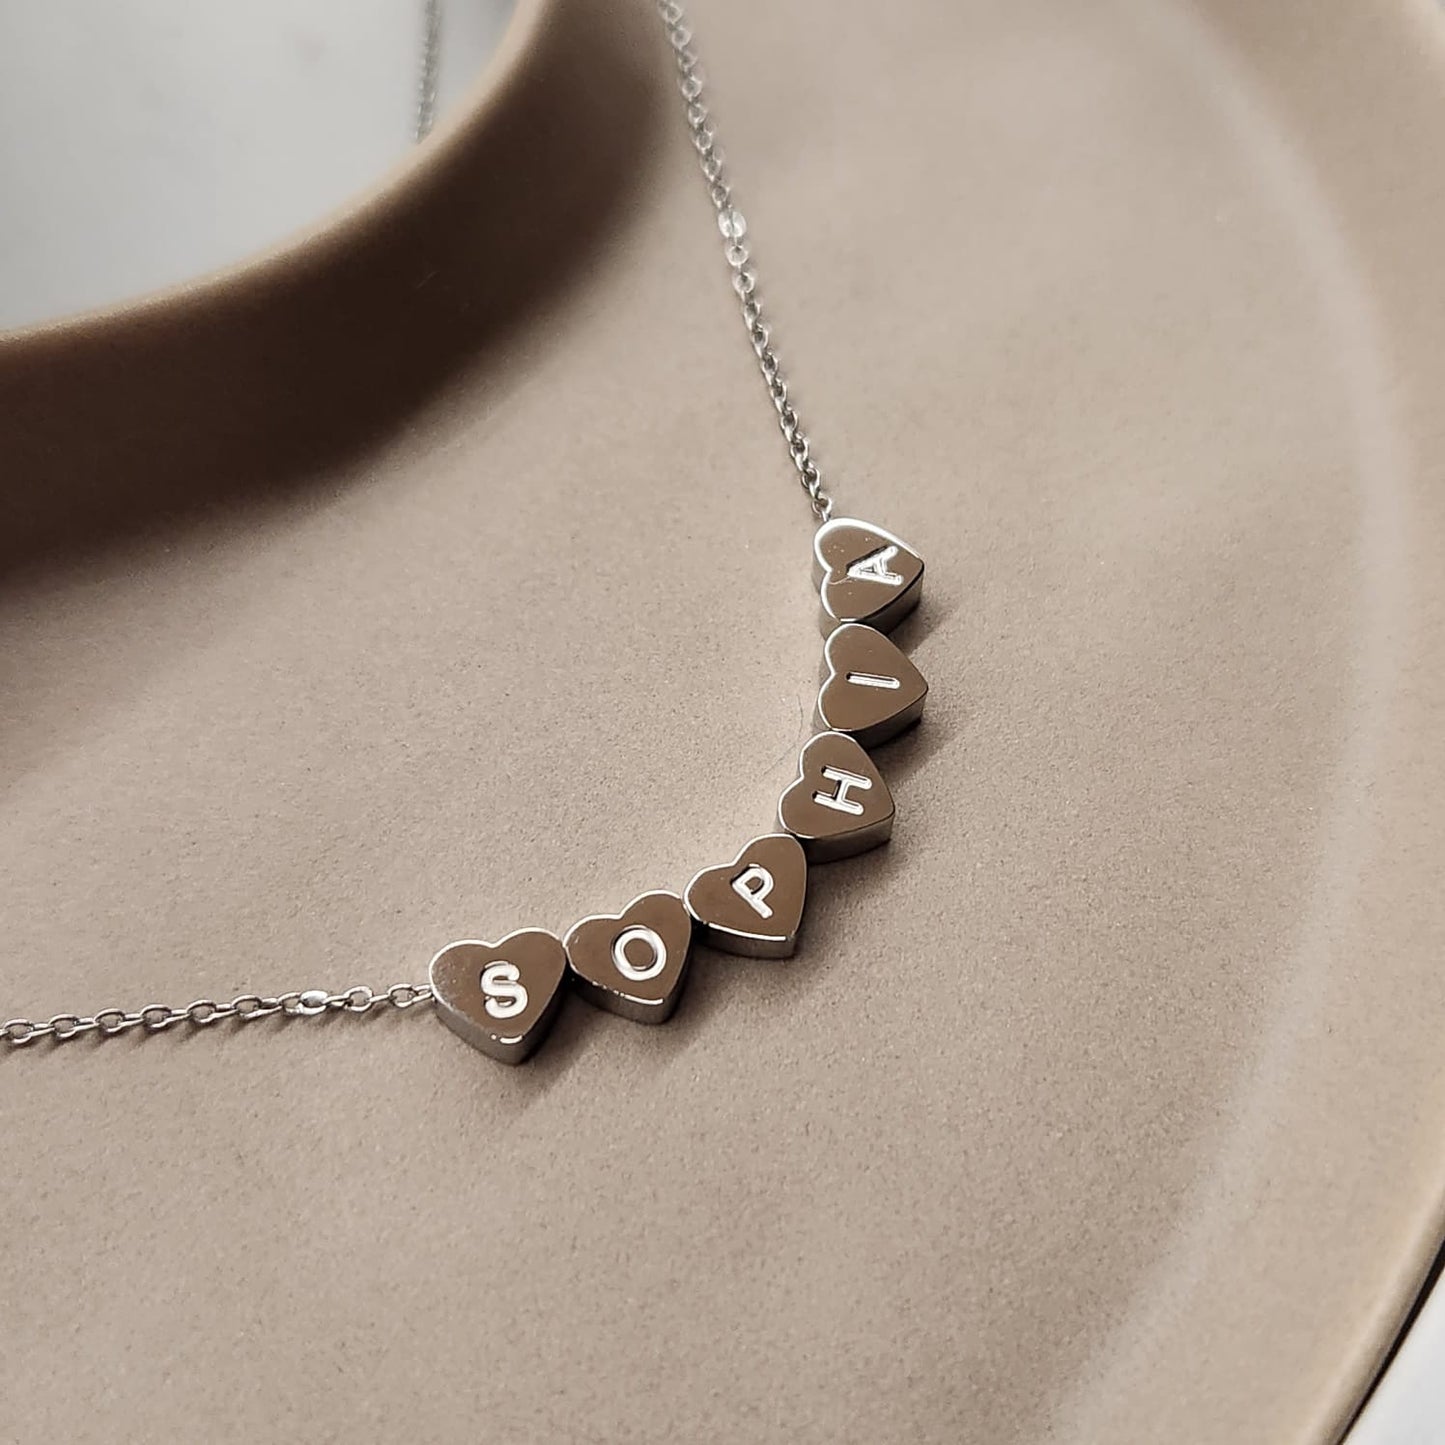 Fine and Yonder Necklaces Heart Bead Necklace